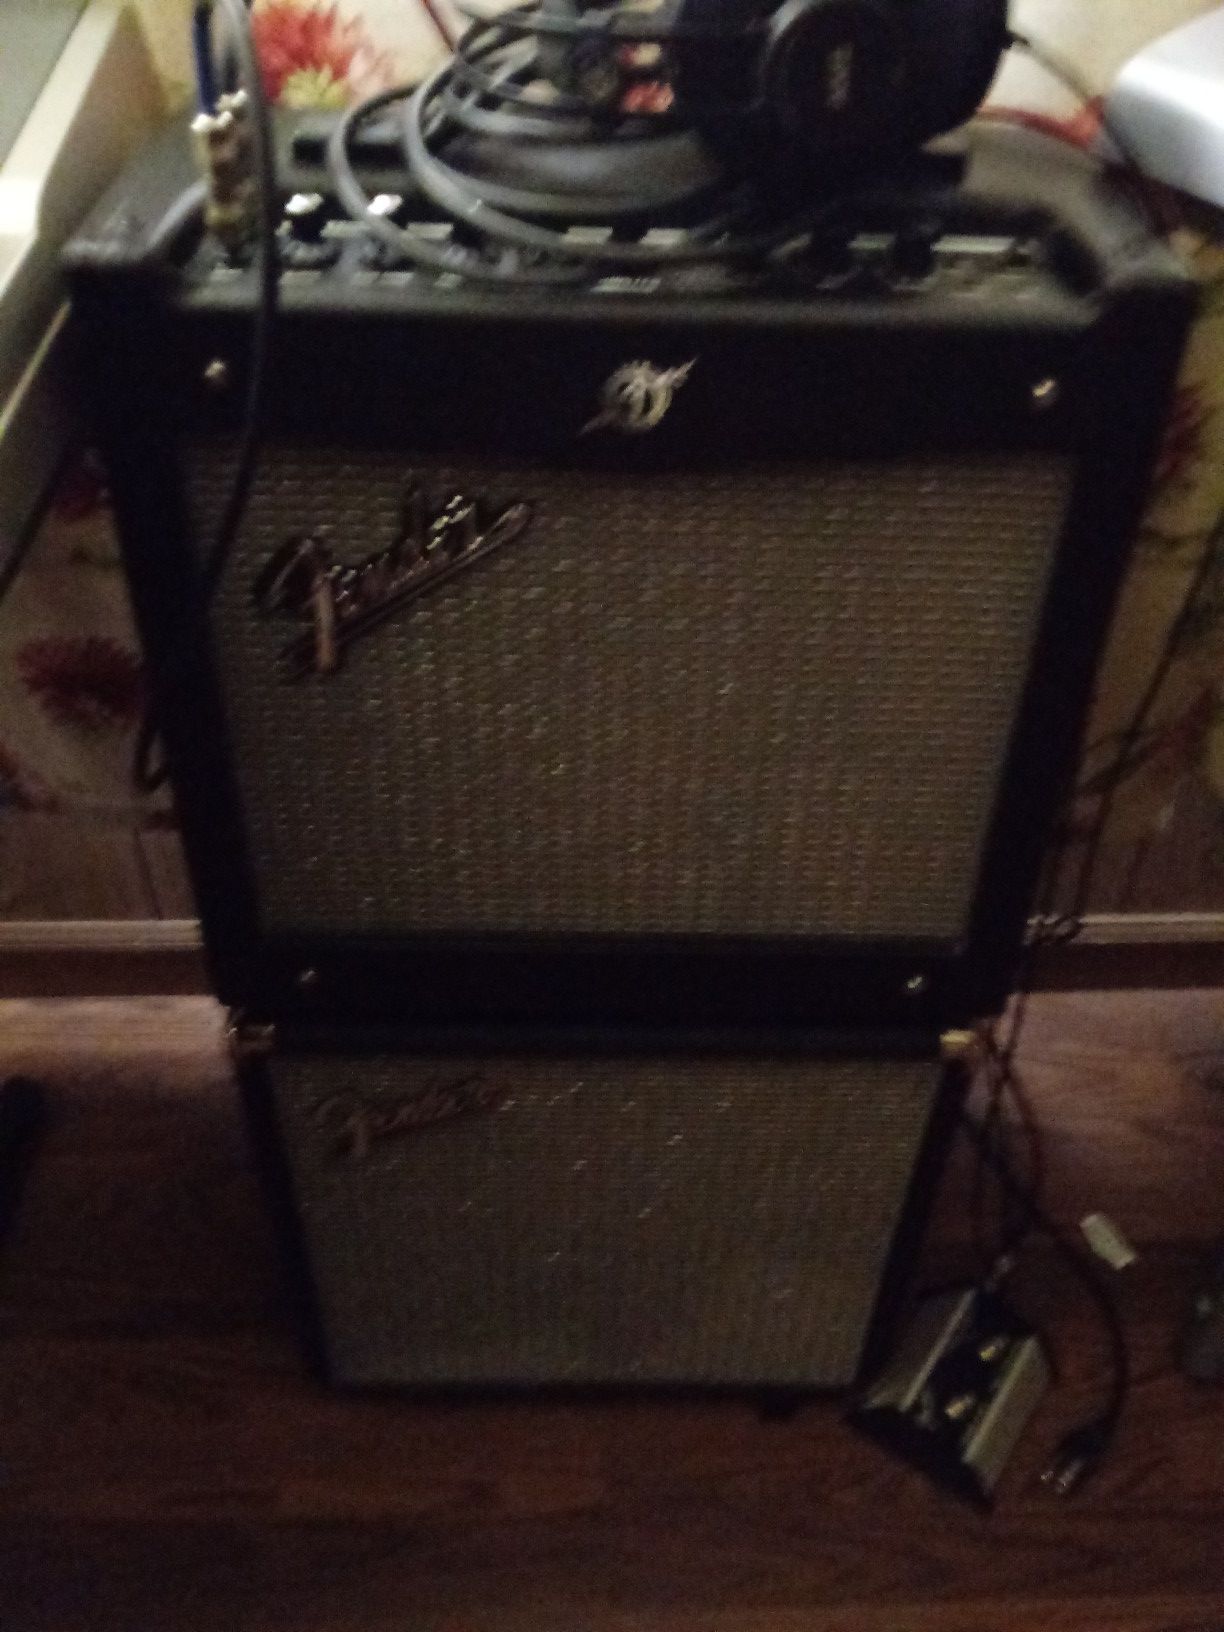 Bass n guitar amps both like new.great for jamming